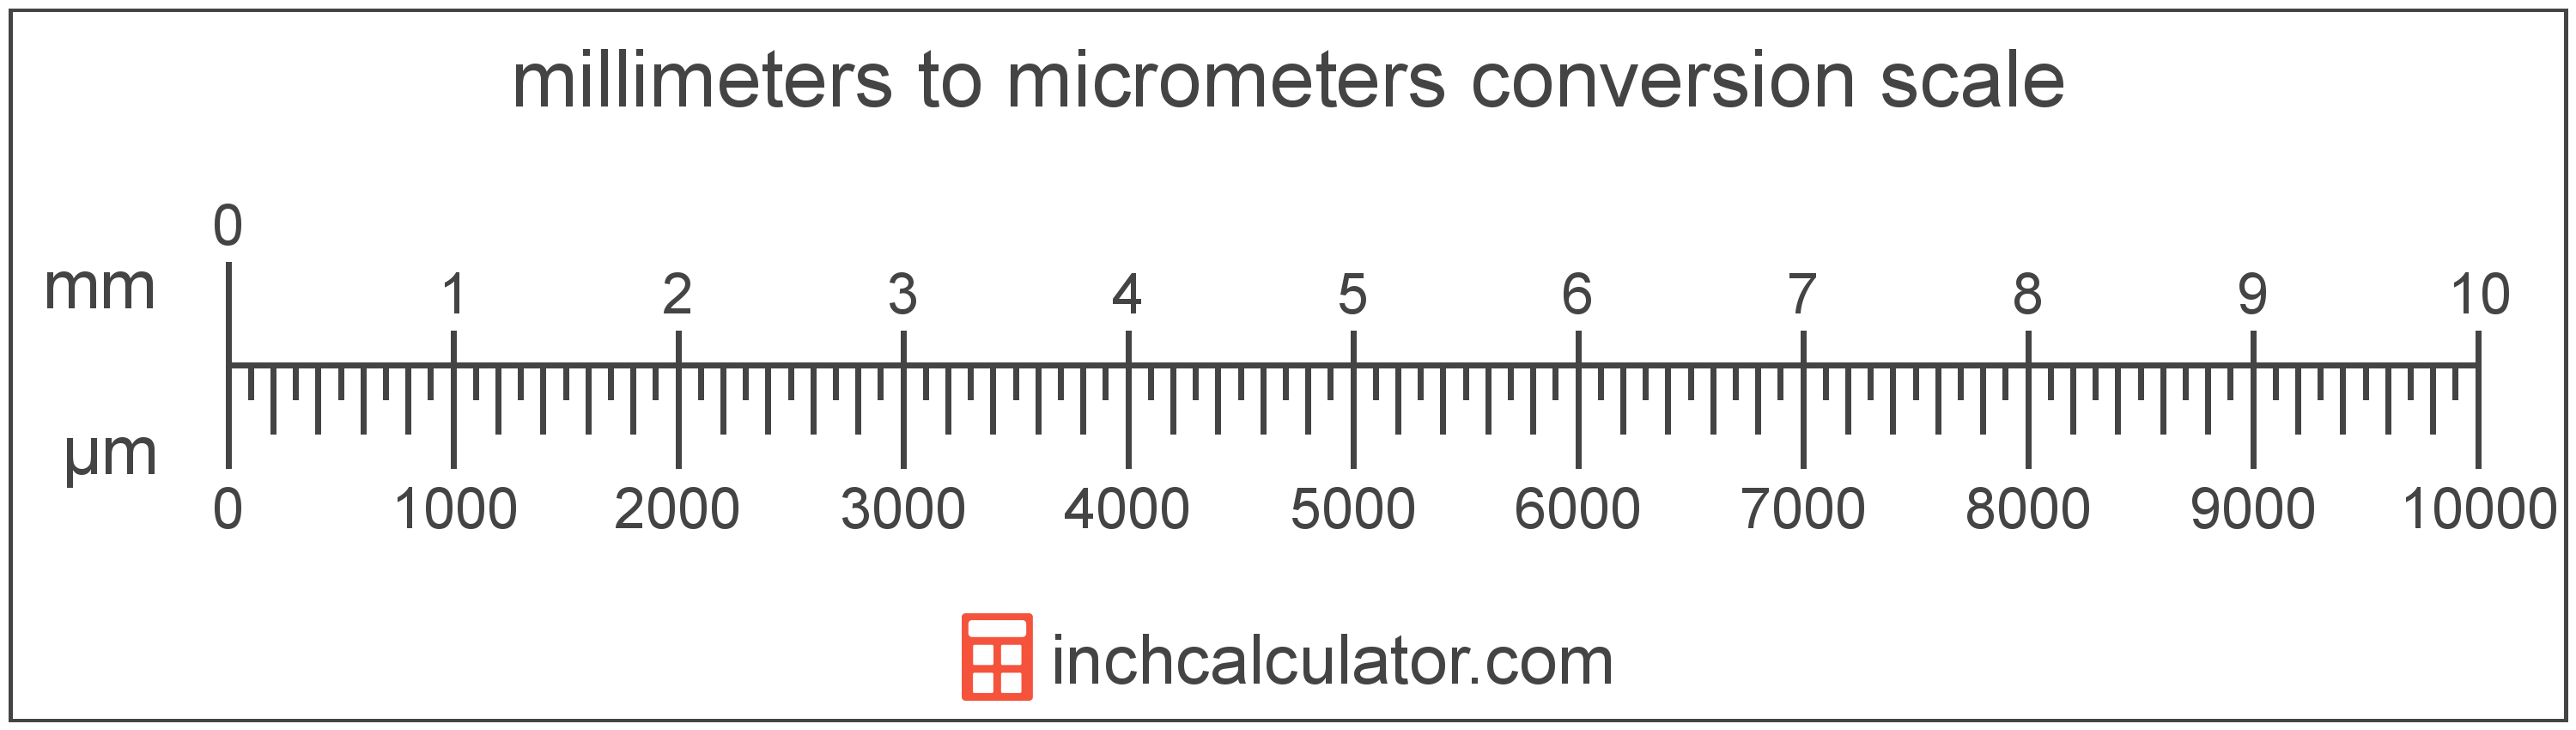 conversion scale showing millimeters and equivalent micrometers length values